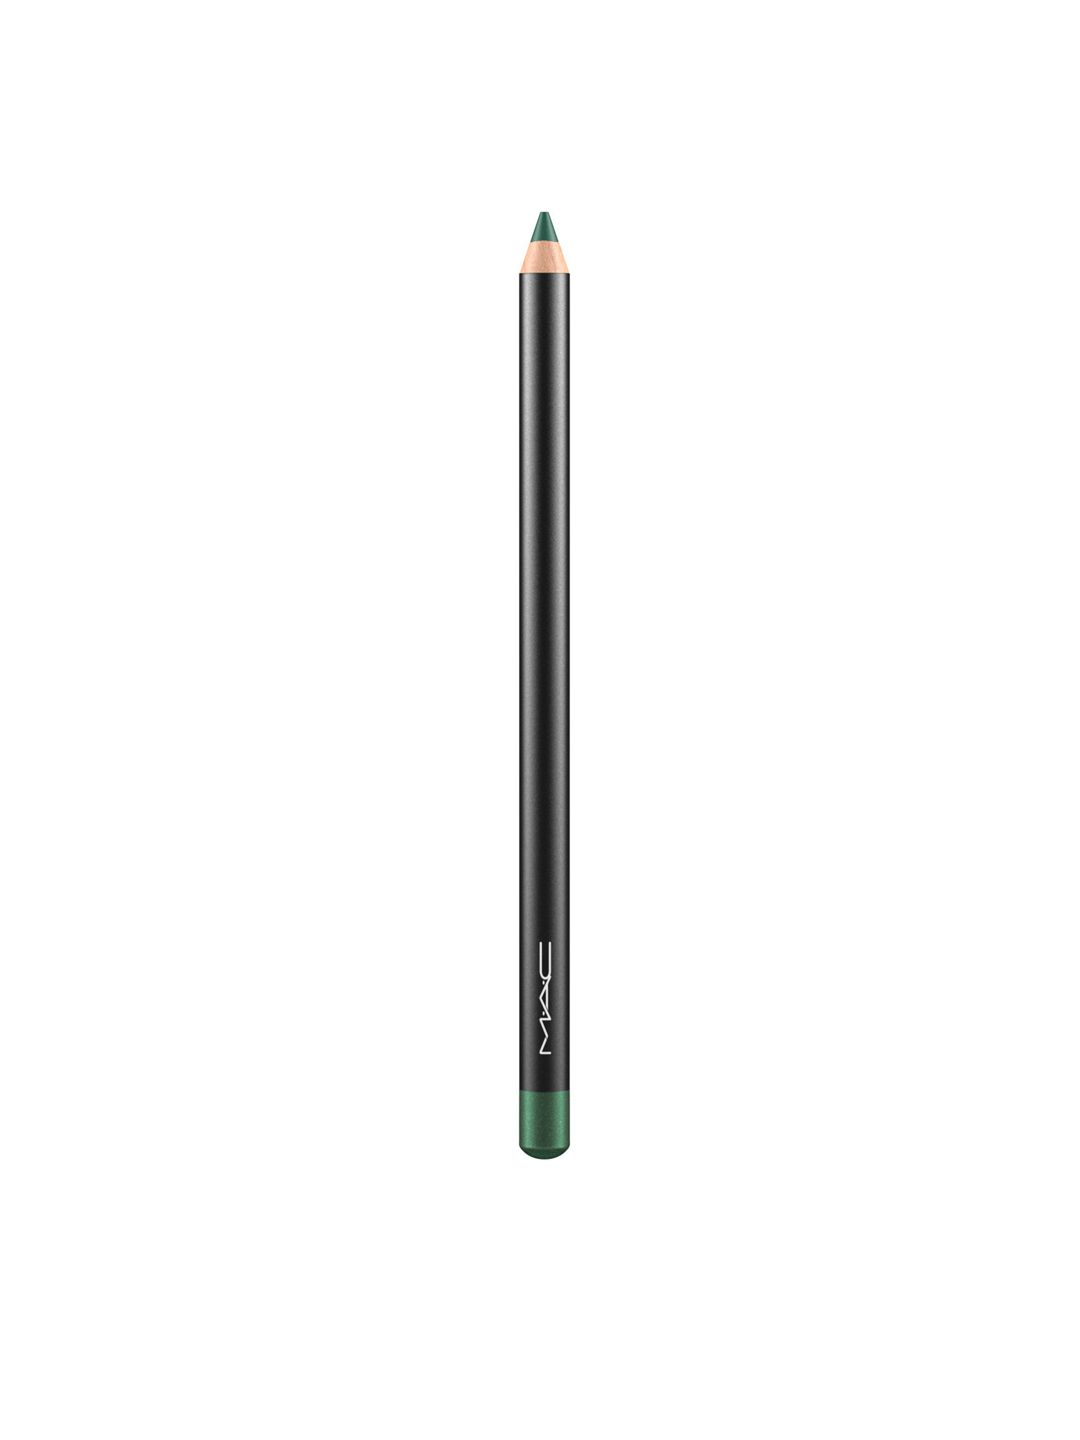 M.A.C Eye Kohl Pencil - Minted 1.3g Price in India